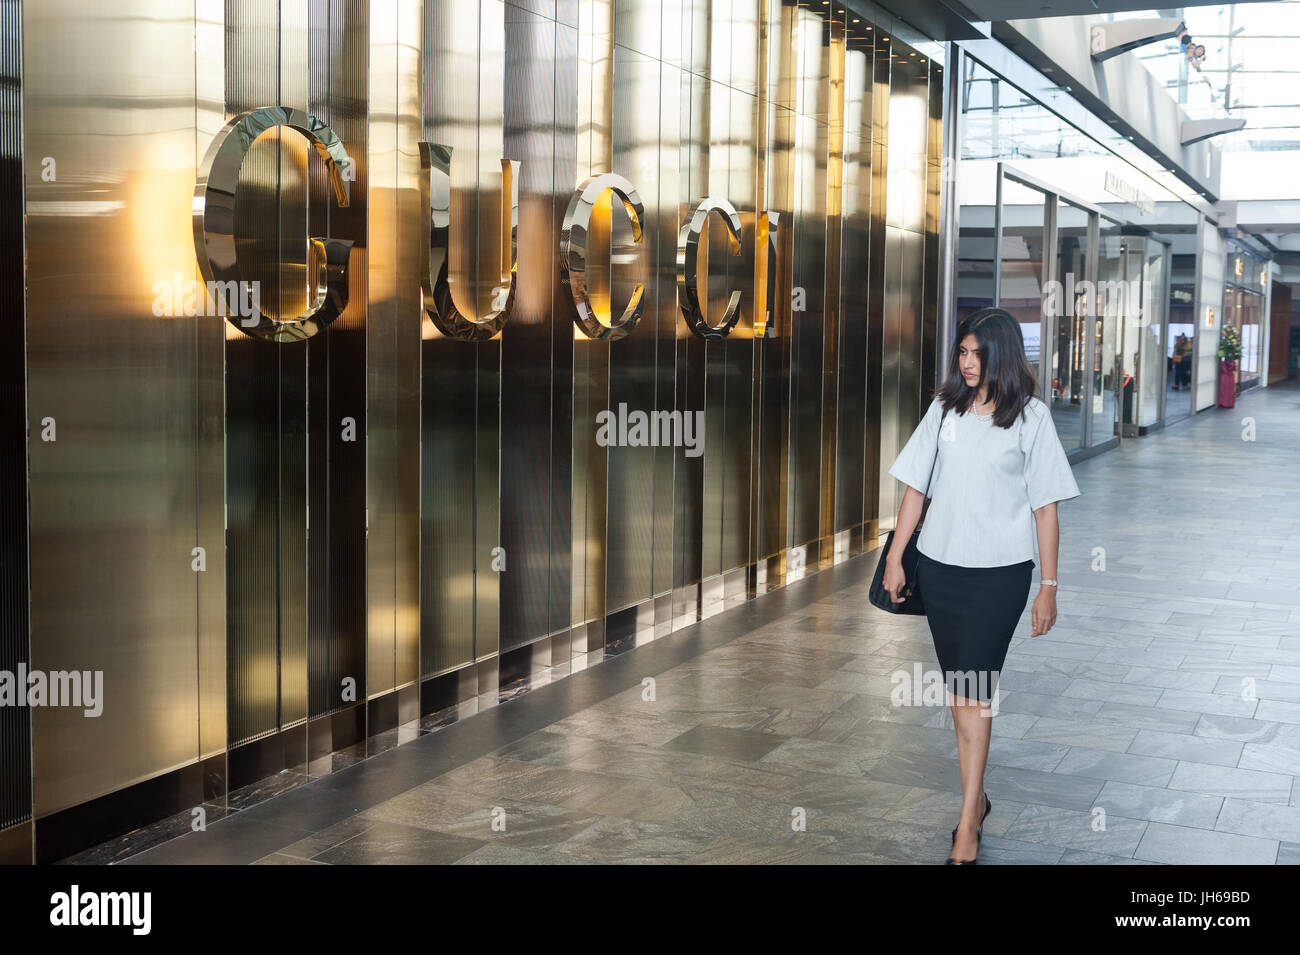 Interior Gucci Shop Stock Photography and Images - Alamy